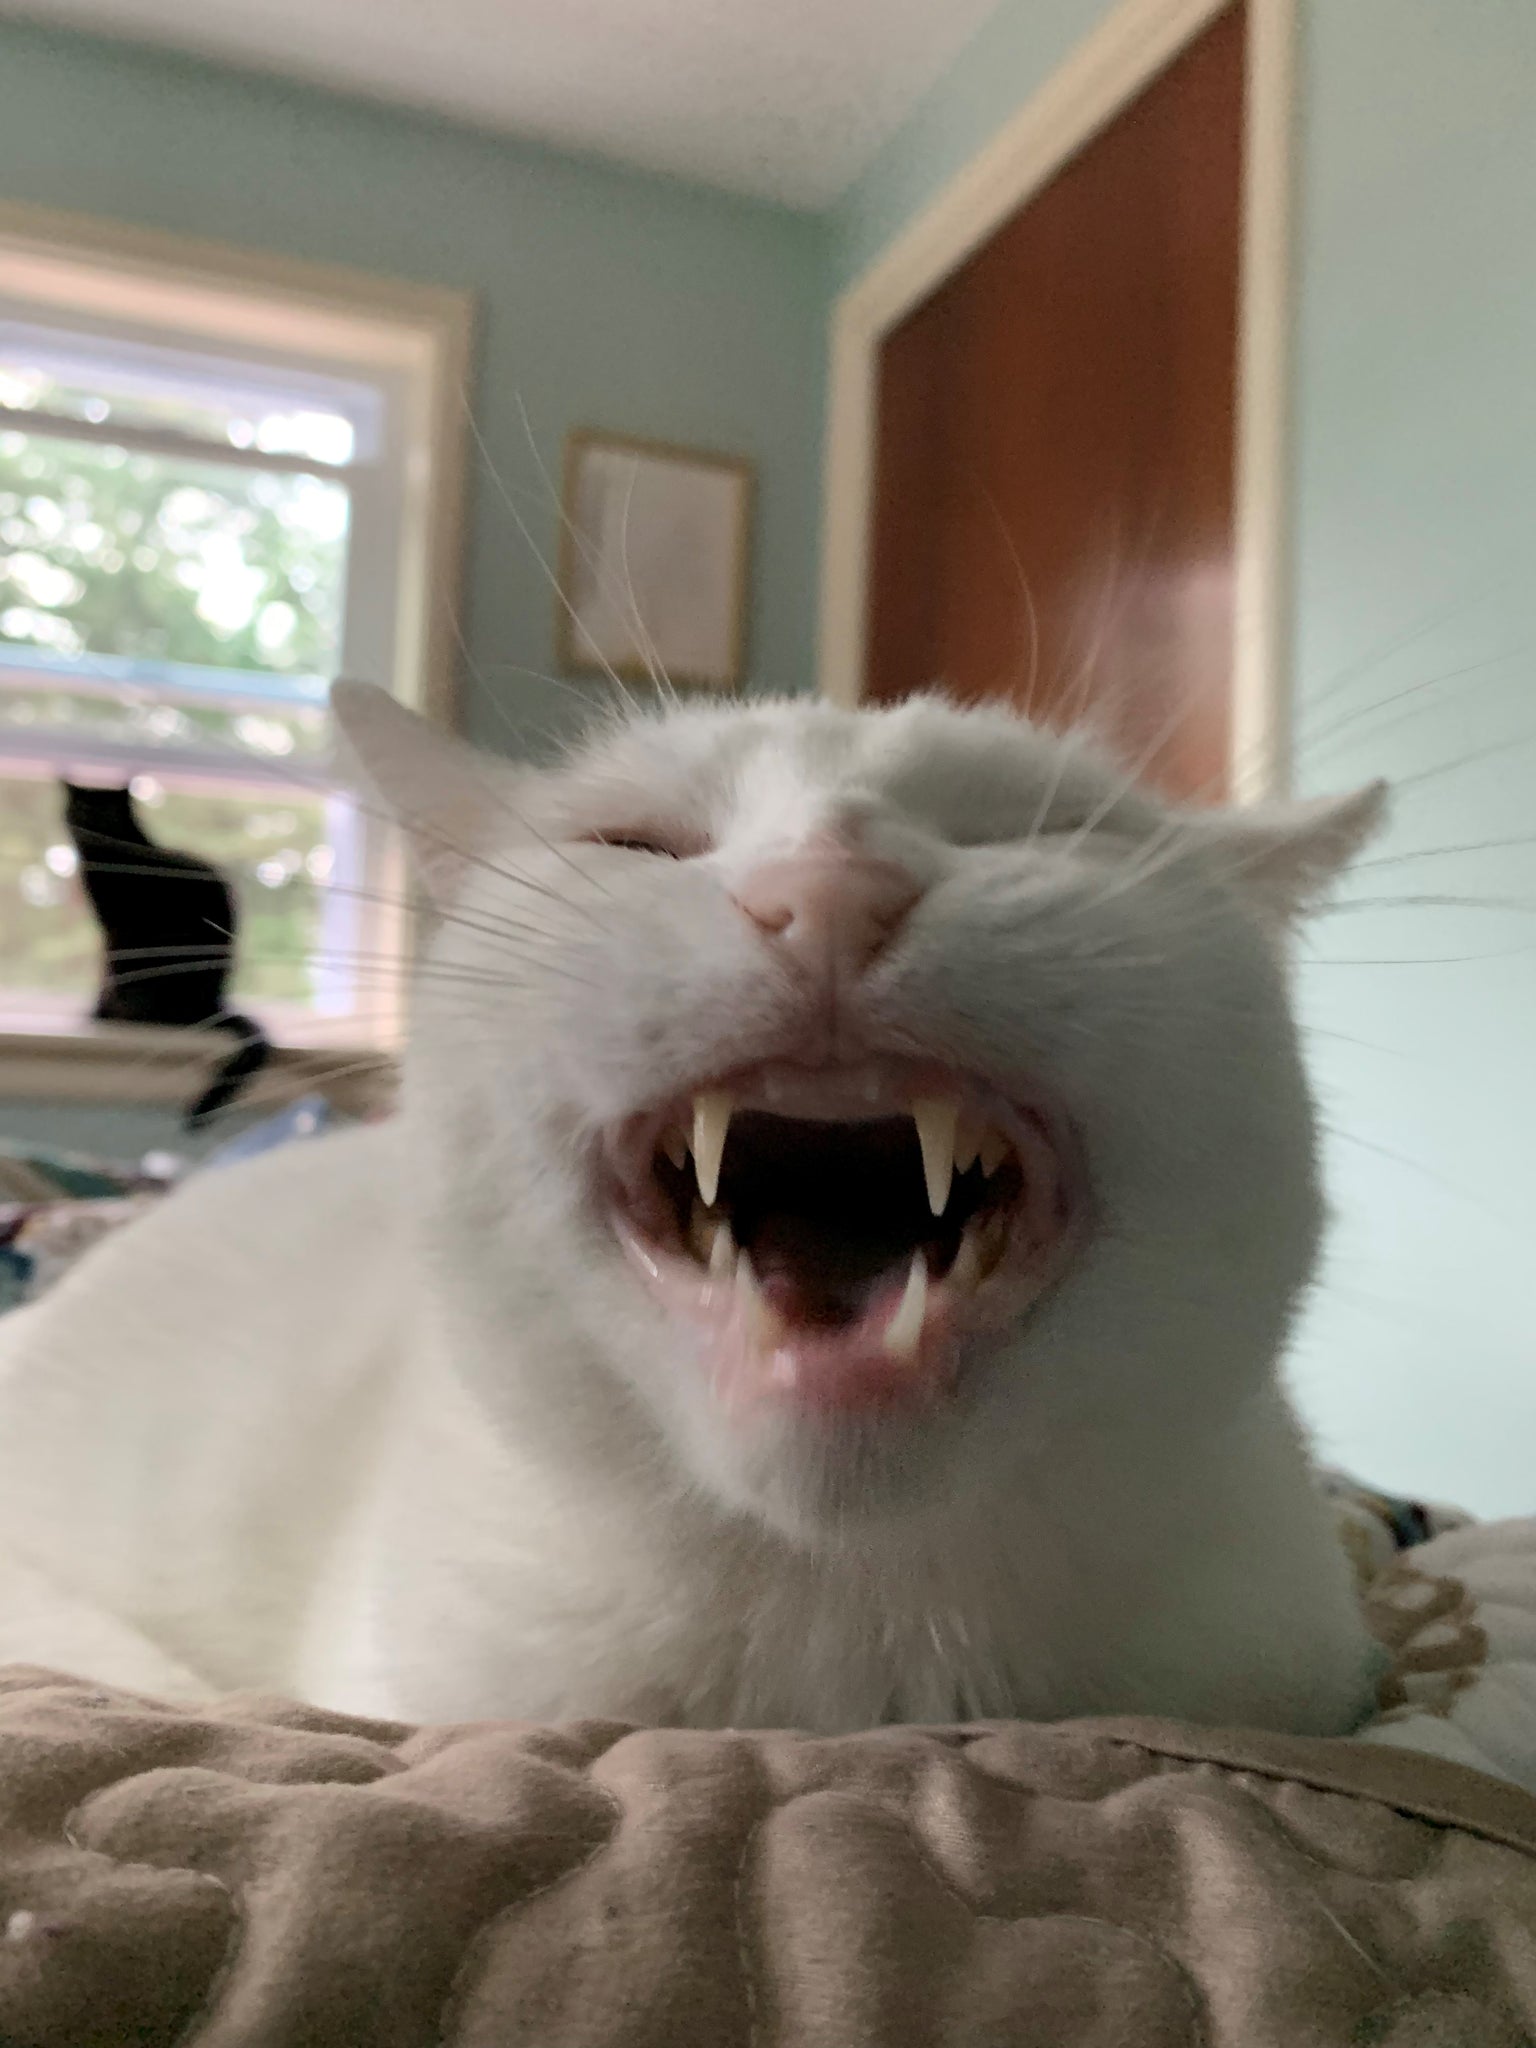 Fangs for reading: About cat teeth!